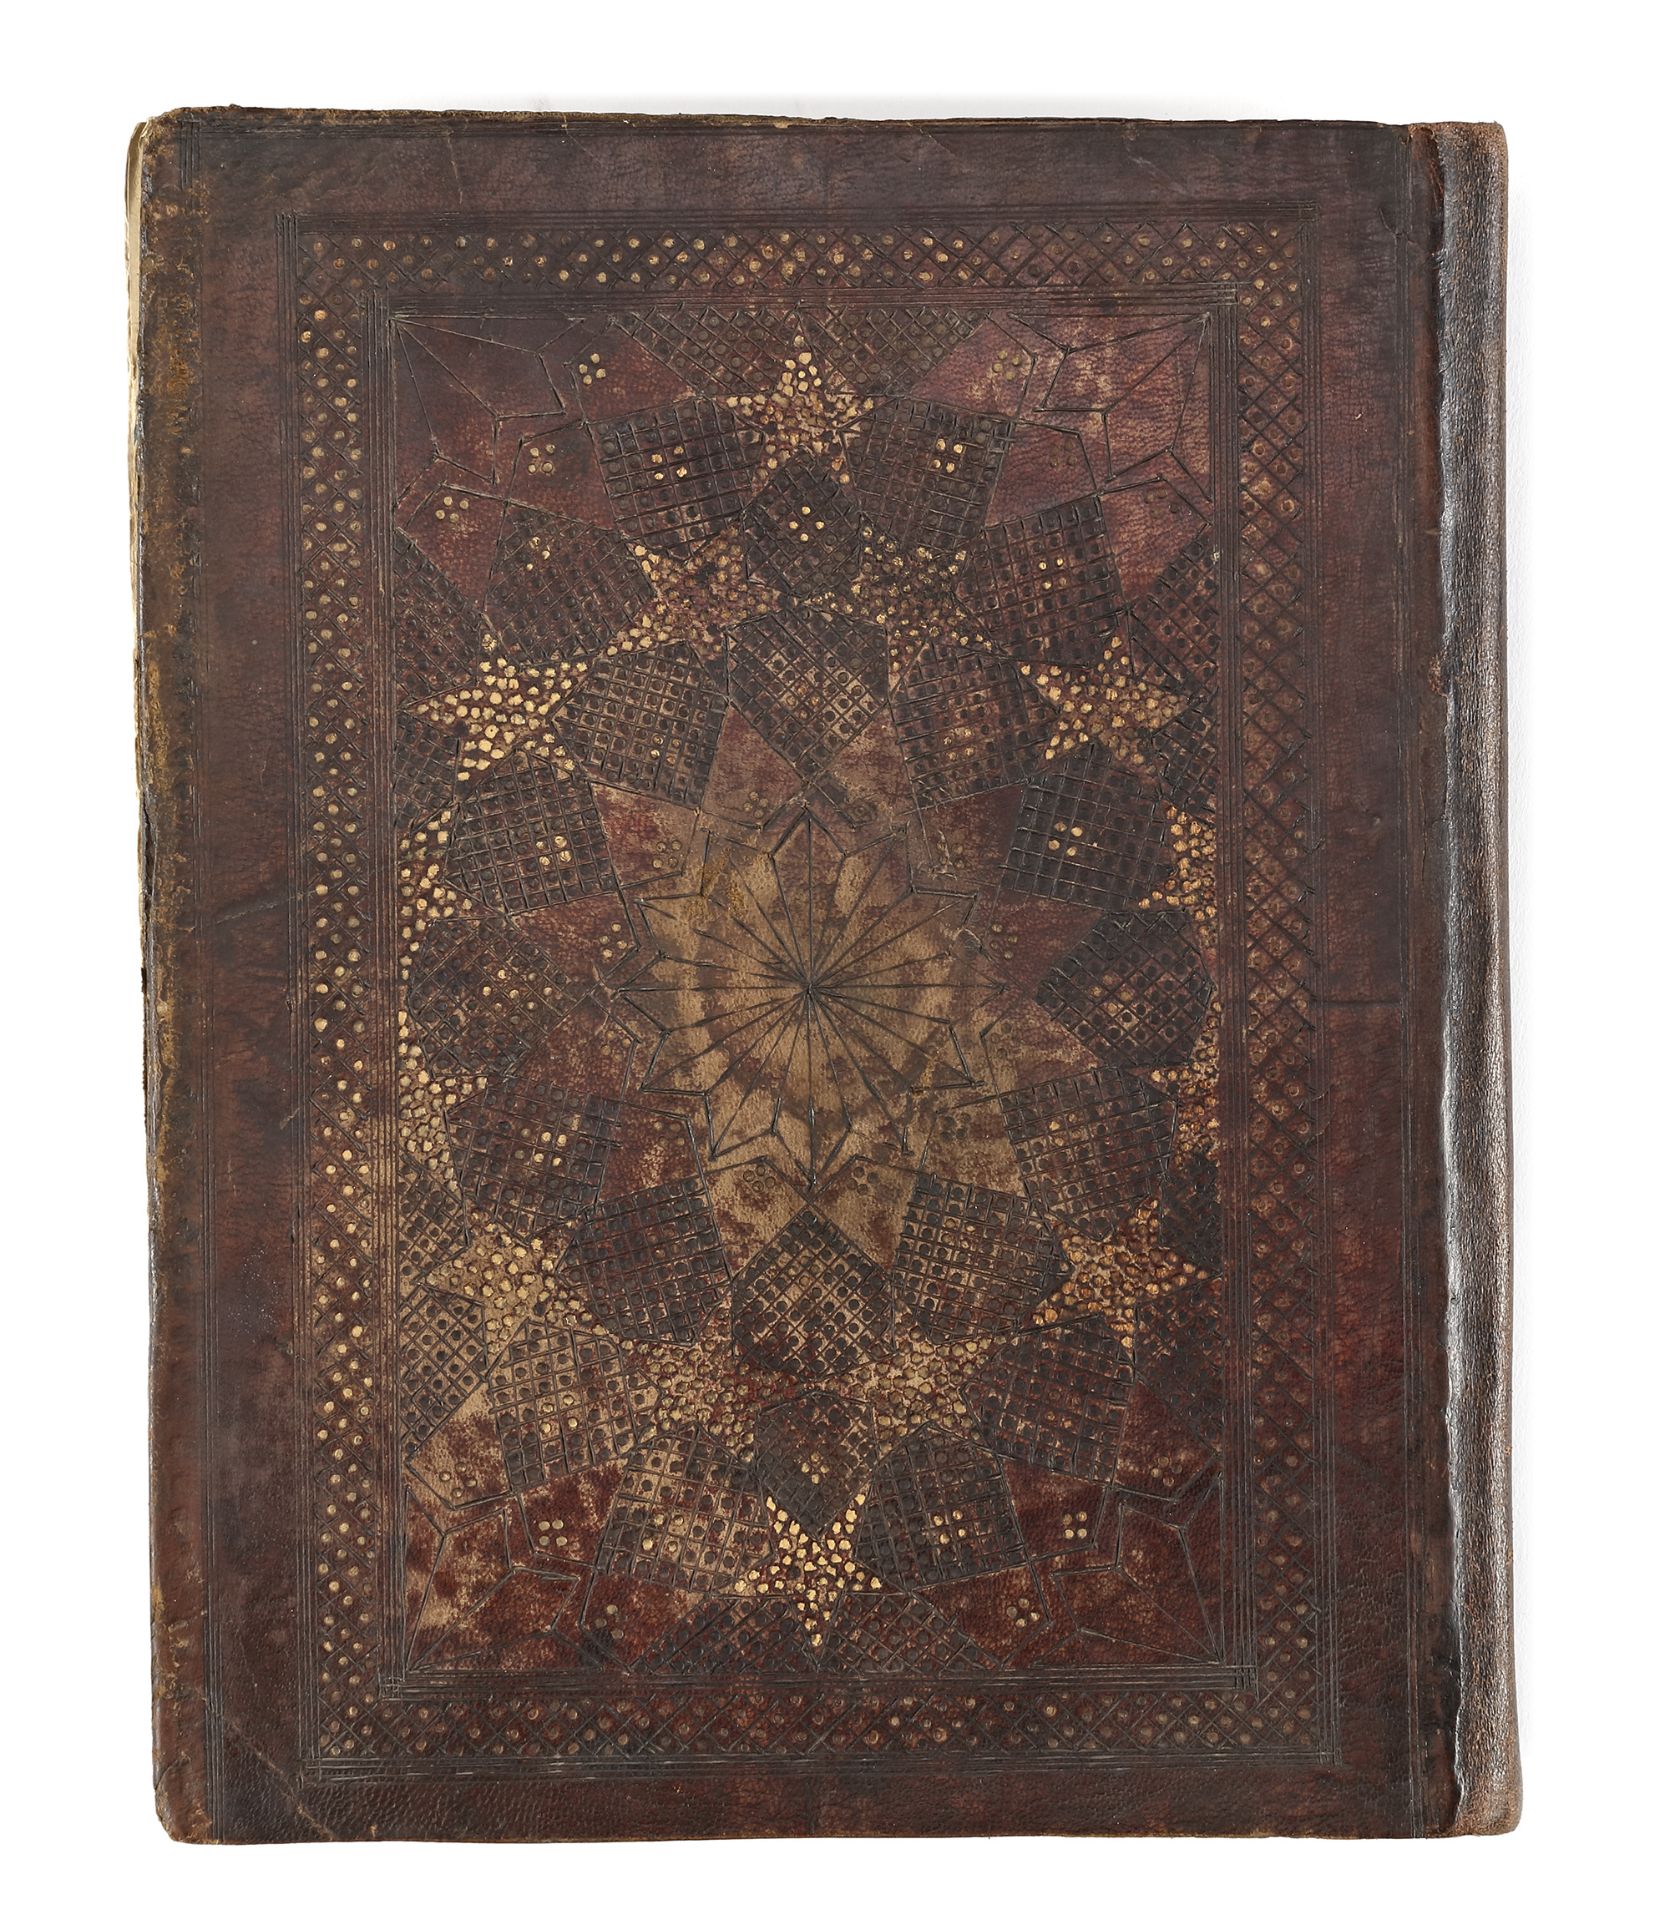 A MAMLUK QURAN, EGYPT OR SYRIA, 14TH CENTURY - Image 8 of 8